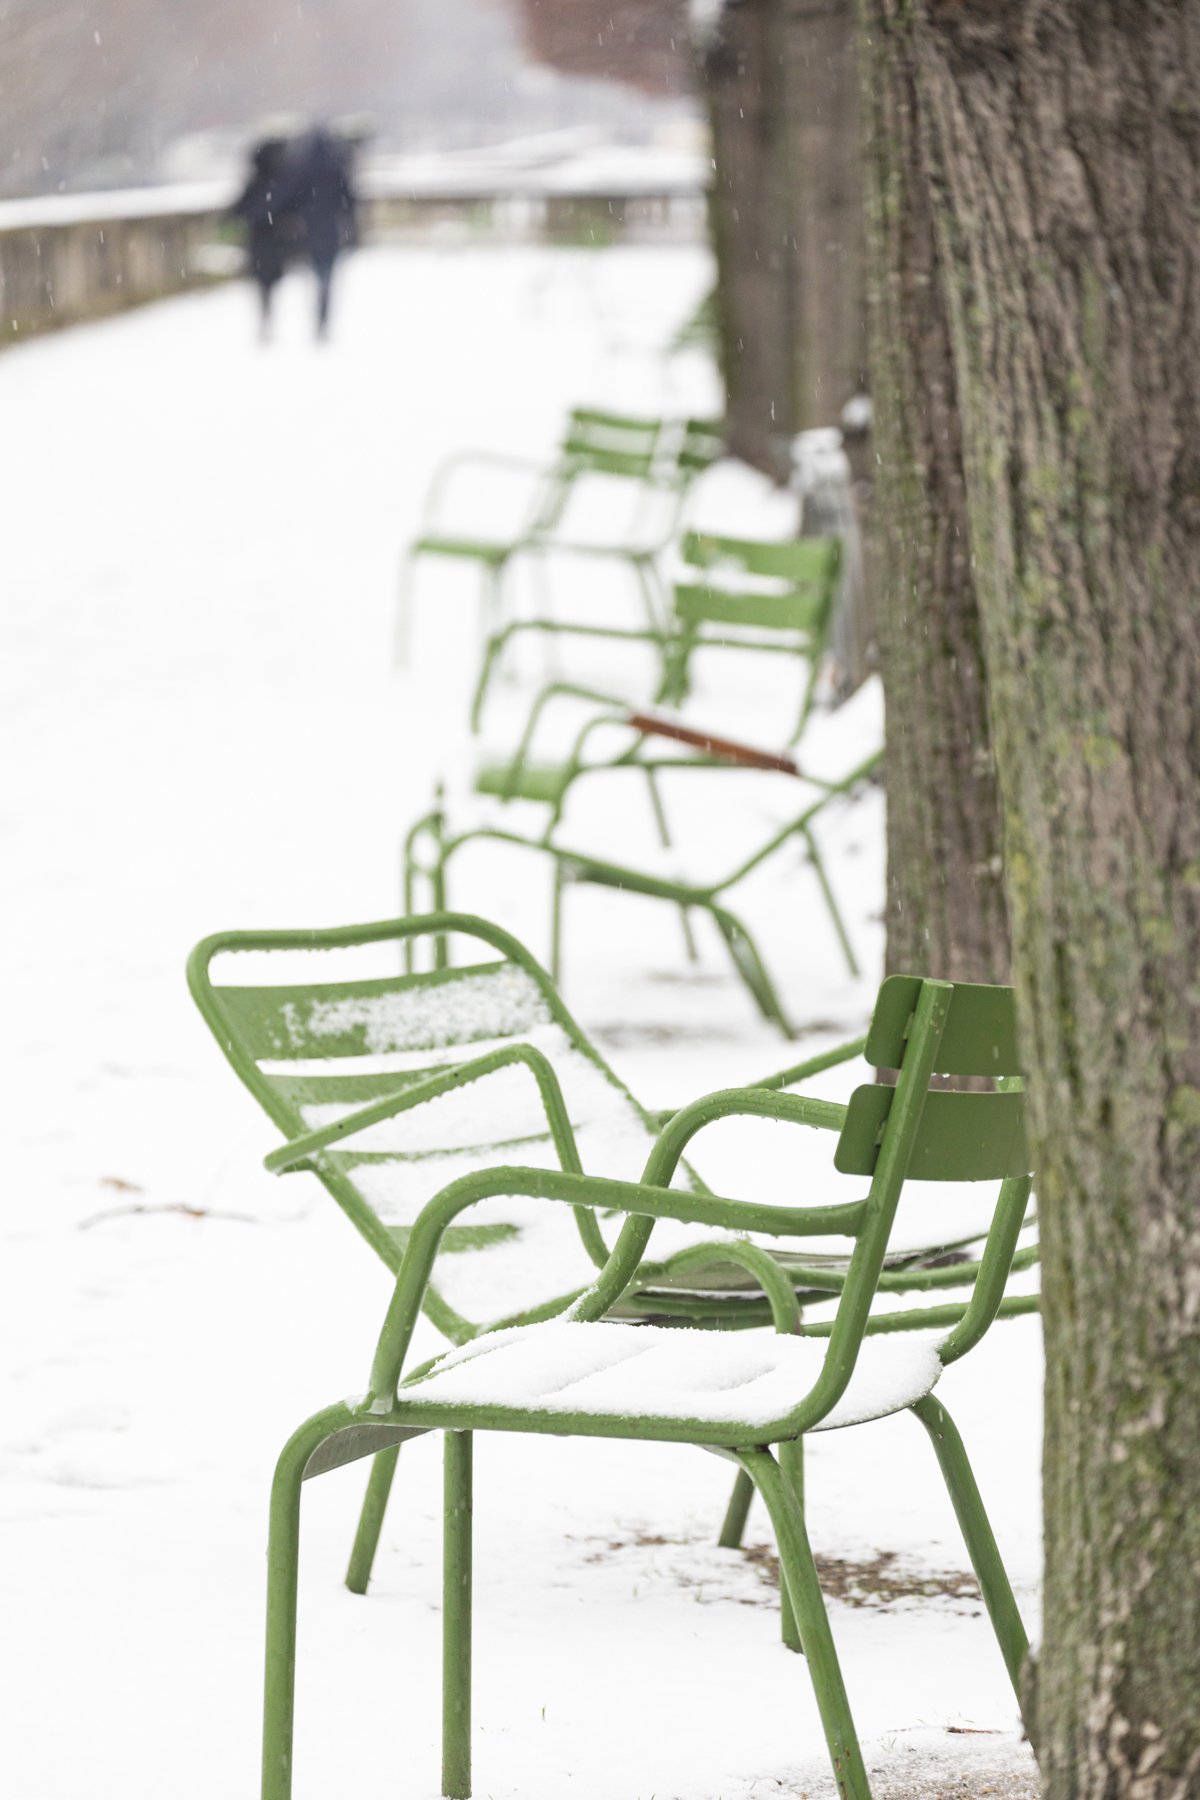 Green chairs in the snow, Tuileries